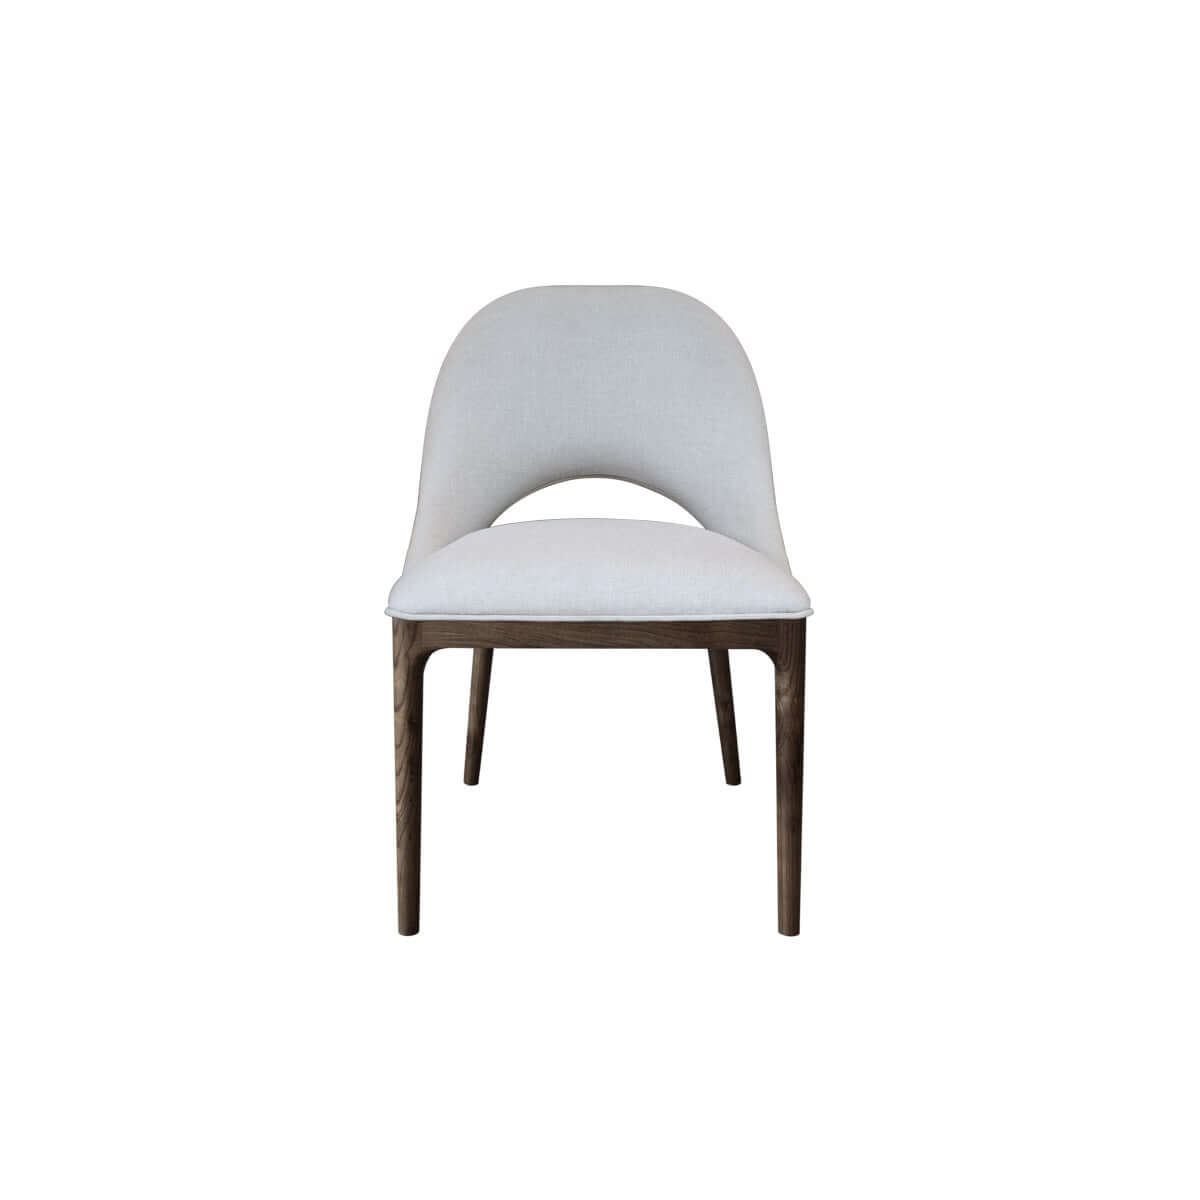 a slim and chic dining chair from the slimline collection